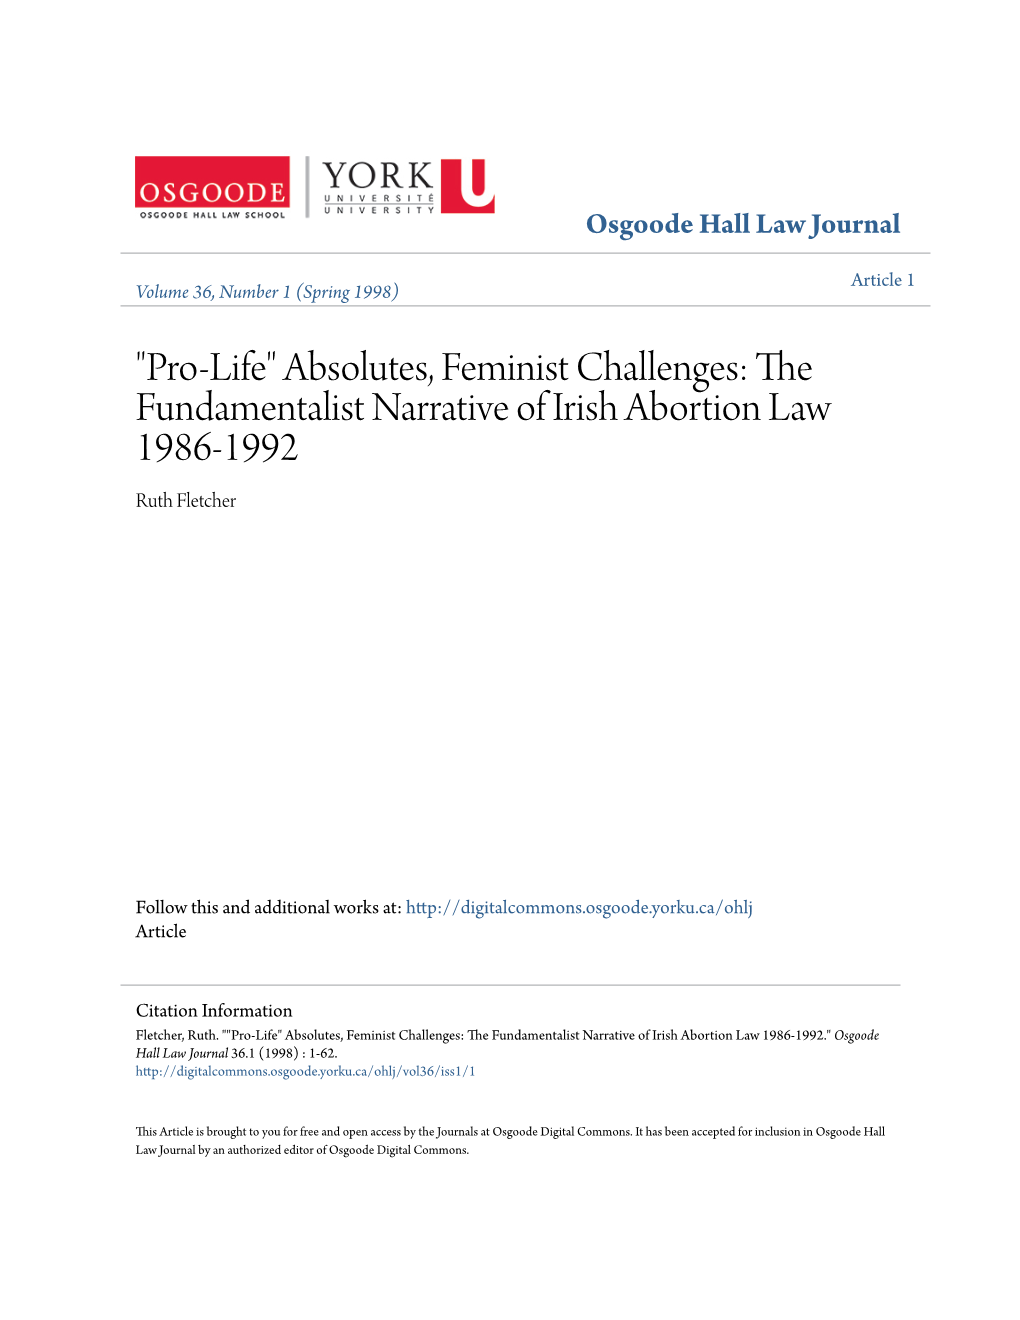 Pro-Life" Absolutes, Feminist Challenges: the Fundamentalist Narrative of Irish Abortion Law 1986-1992 Ruth Fletcher